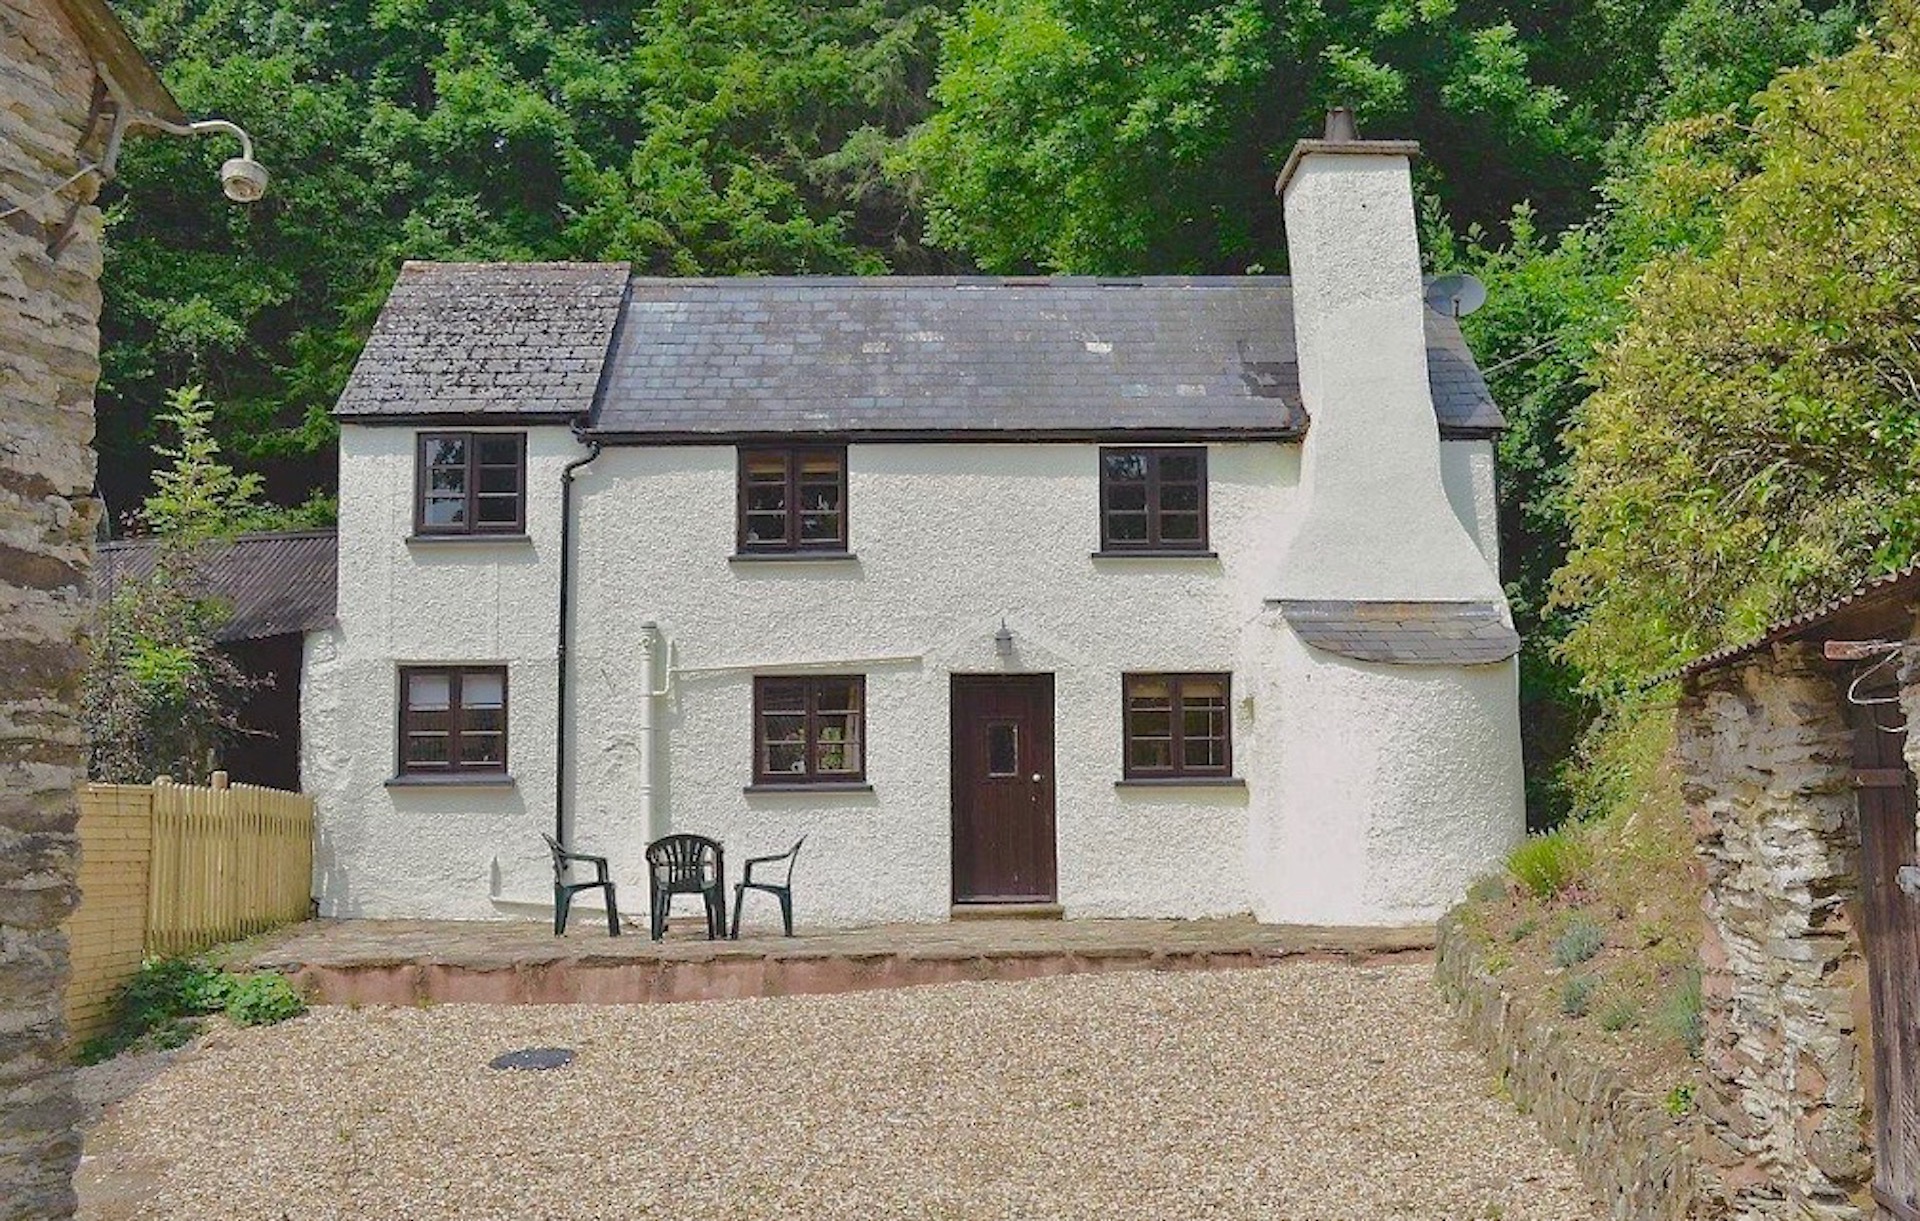 Exterior of a slate-roofed Exmoor holiday cottage with a large chimney and bread oven stack, overlooked by tall woodland trees..